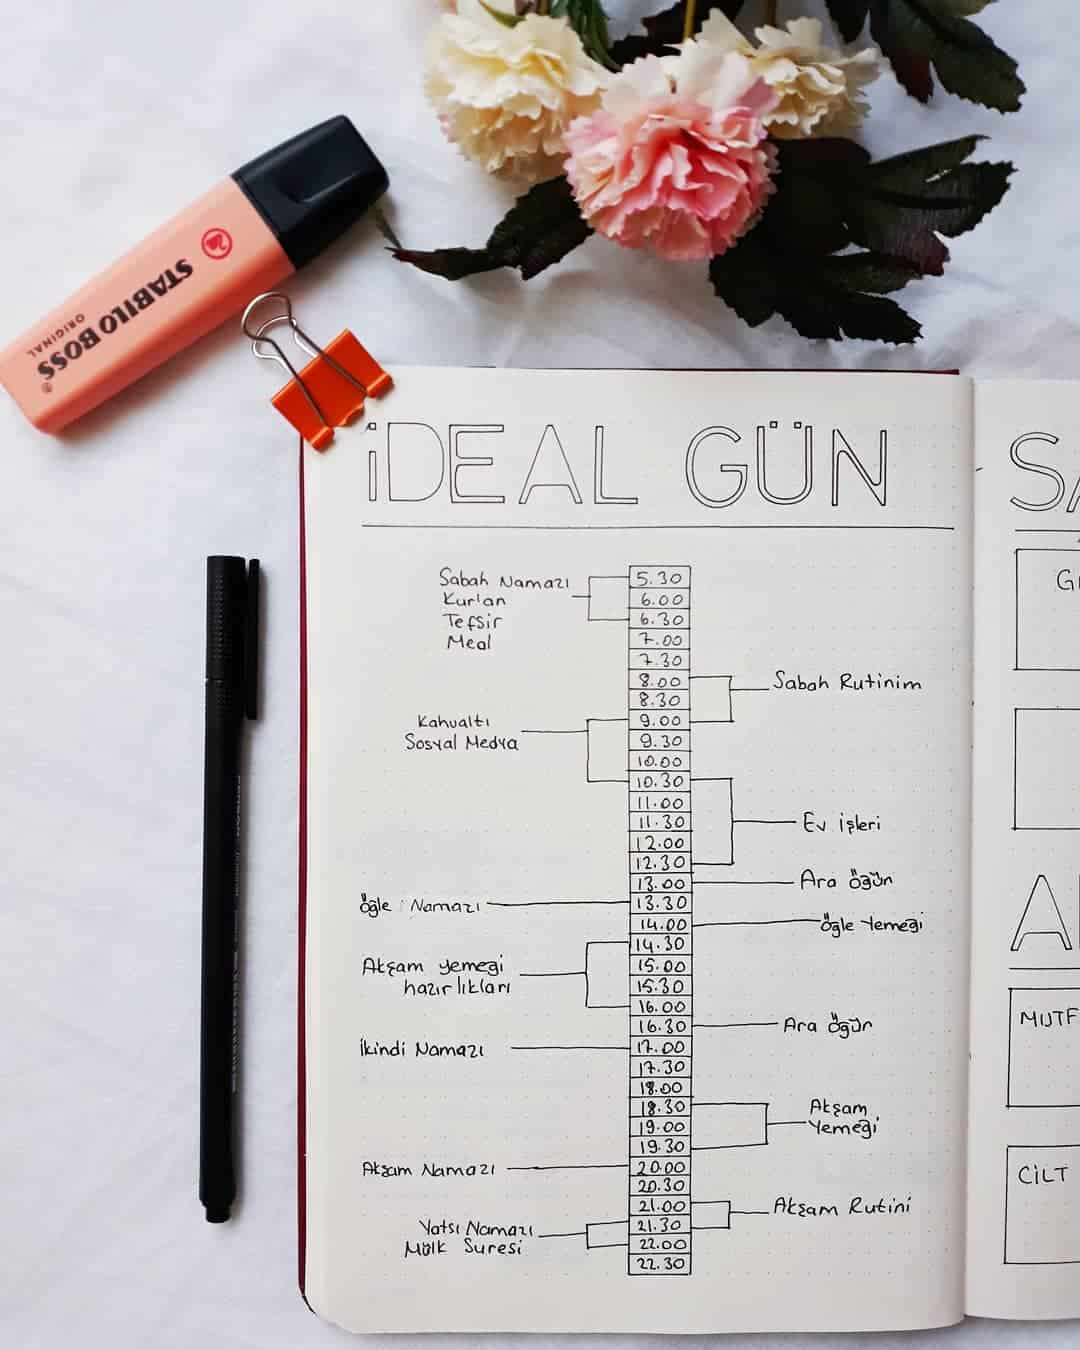 17 Routine Spreads In Your Bullet Journal To Bring You More Structure